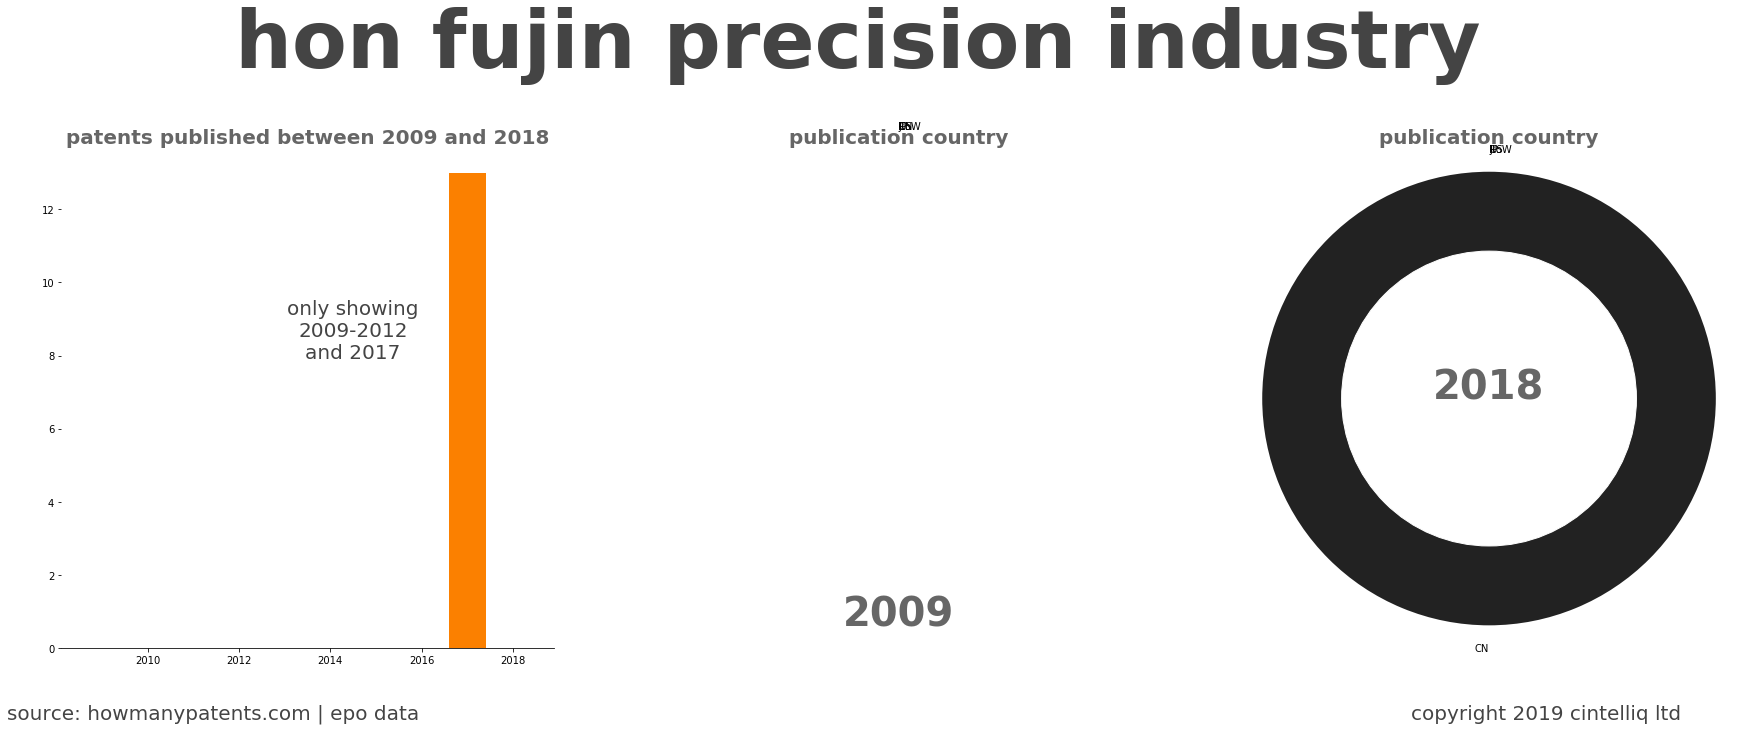 summary of patents for Hon Fujin Precision Industry 